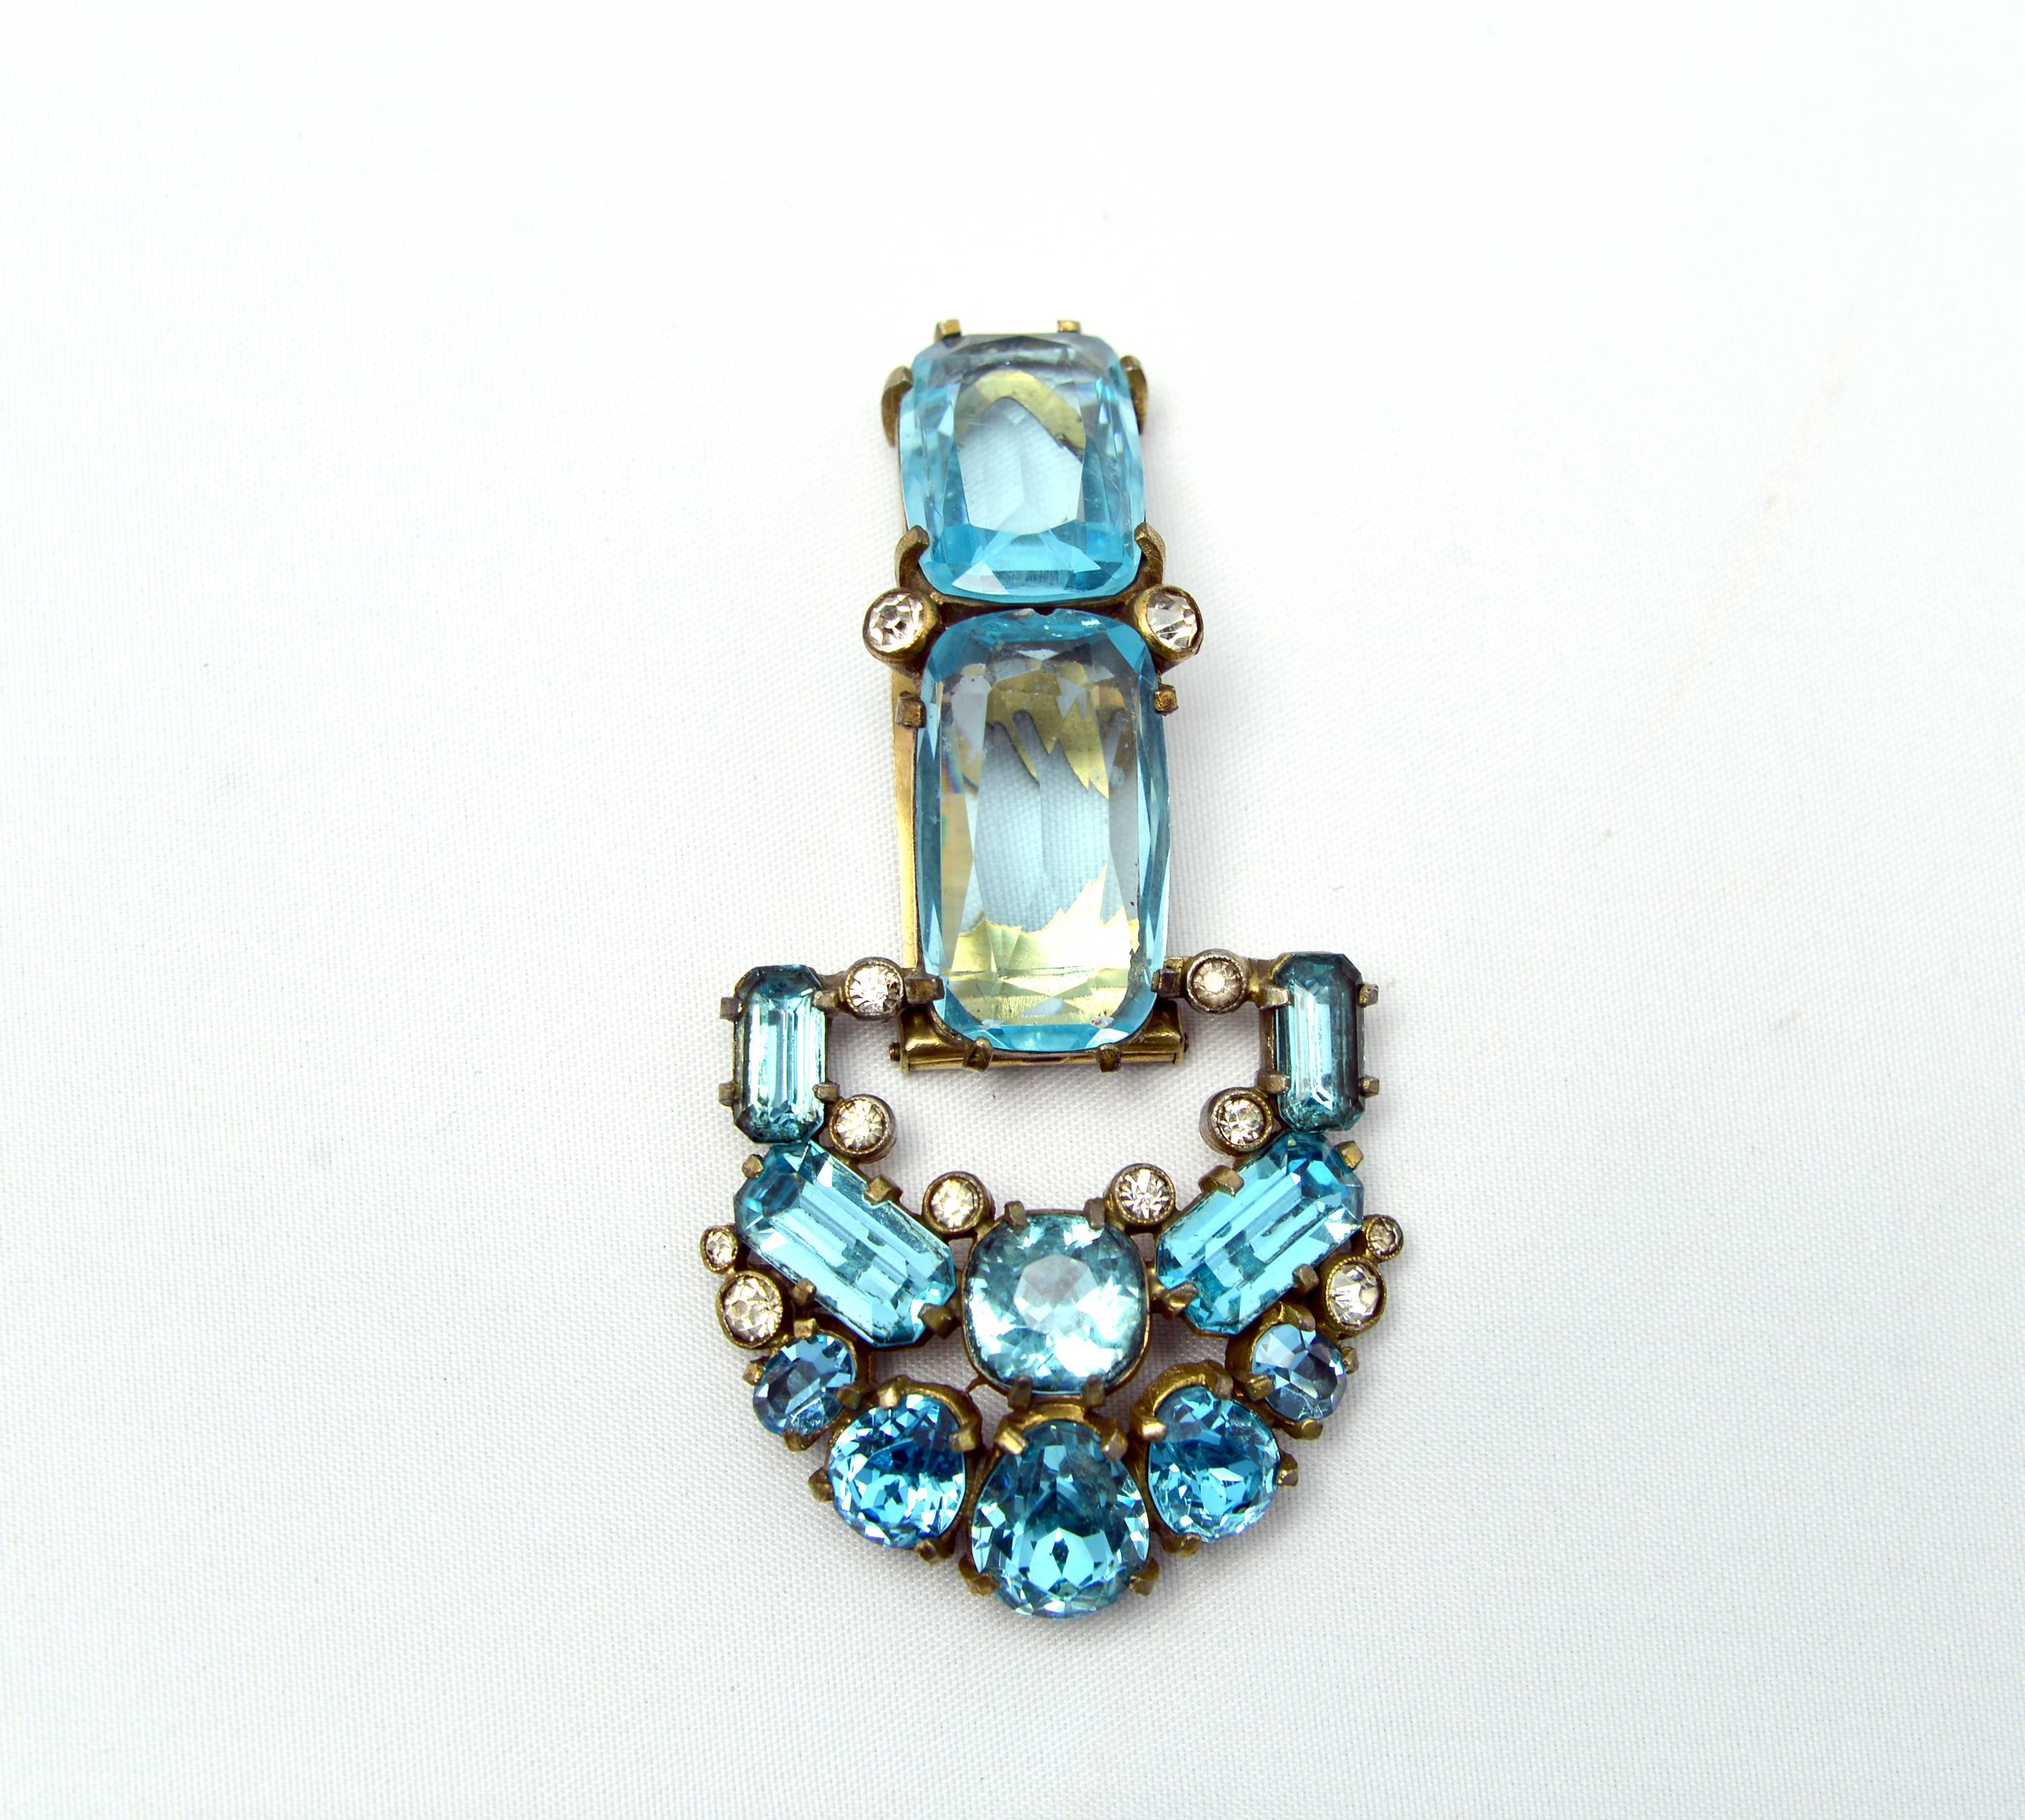 Absolutely amazing Pre-War Eisenberg Original turquoise fur clip. Vintage jewelry collectors agree that there weren't many Jewelers in our nation's history quite like Eisenberg.  Attention to detail, use of fabulous materials, and creativity allowed